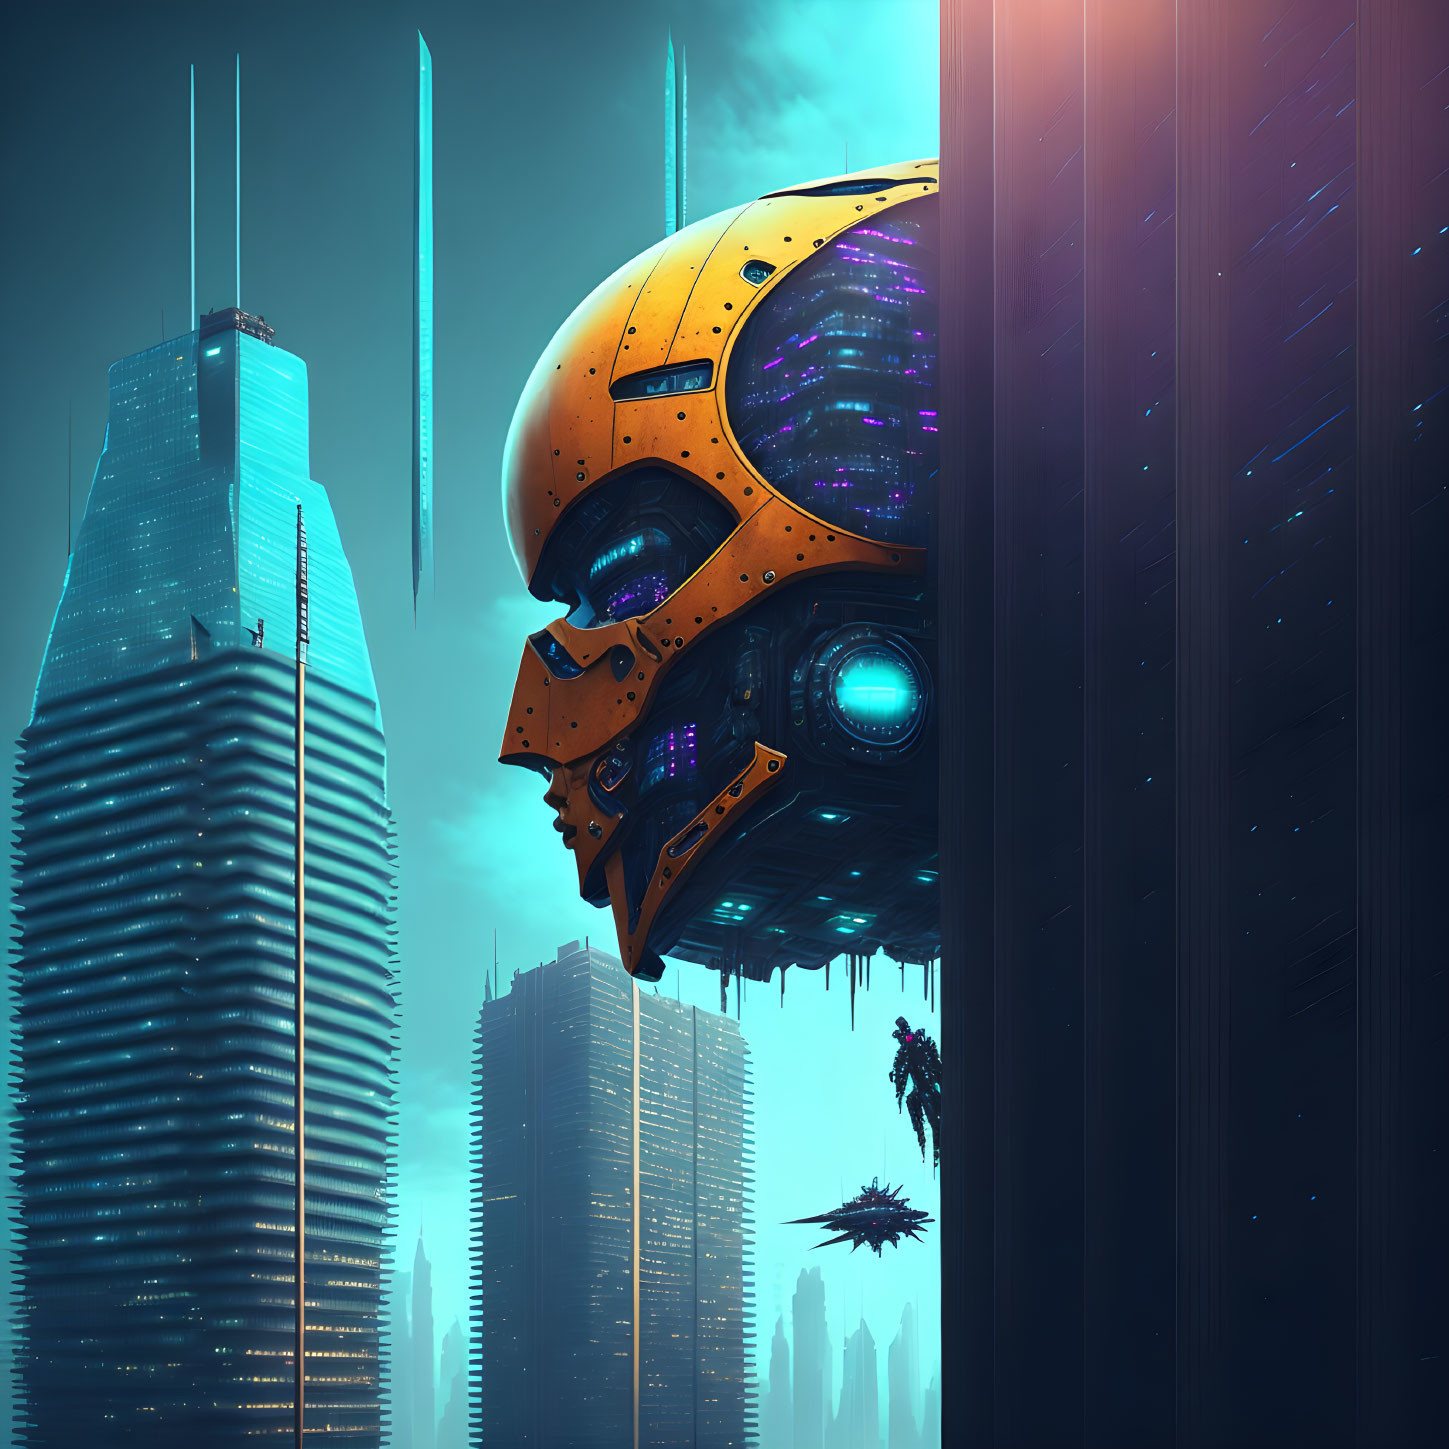 Giant futuristic robot head beside skyscrapers at twilight with flying vehicles.